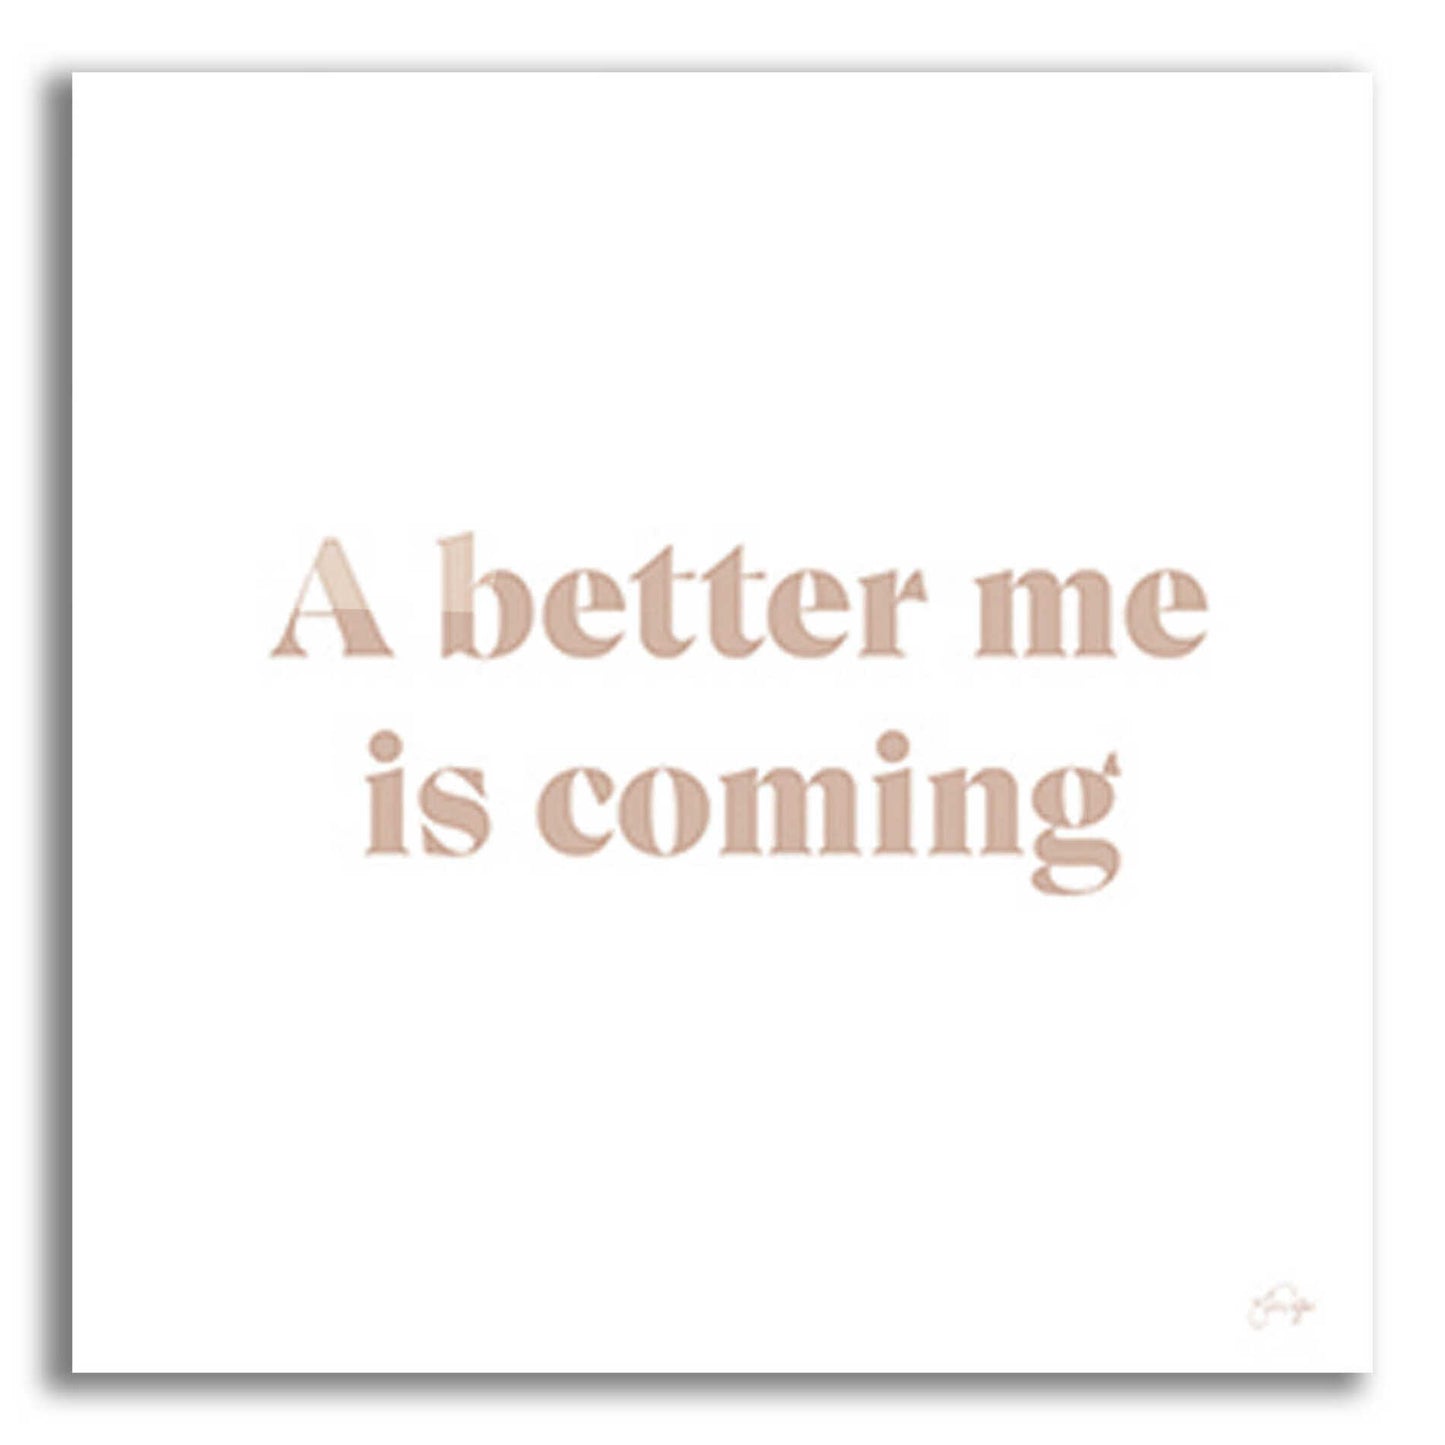 Epic Art 'A Better Me is Coming' by Yass Naffas Designs, Acrylic Glass Wall Art